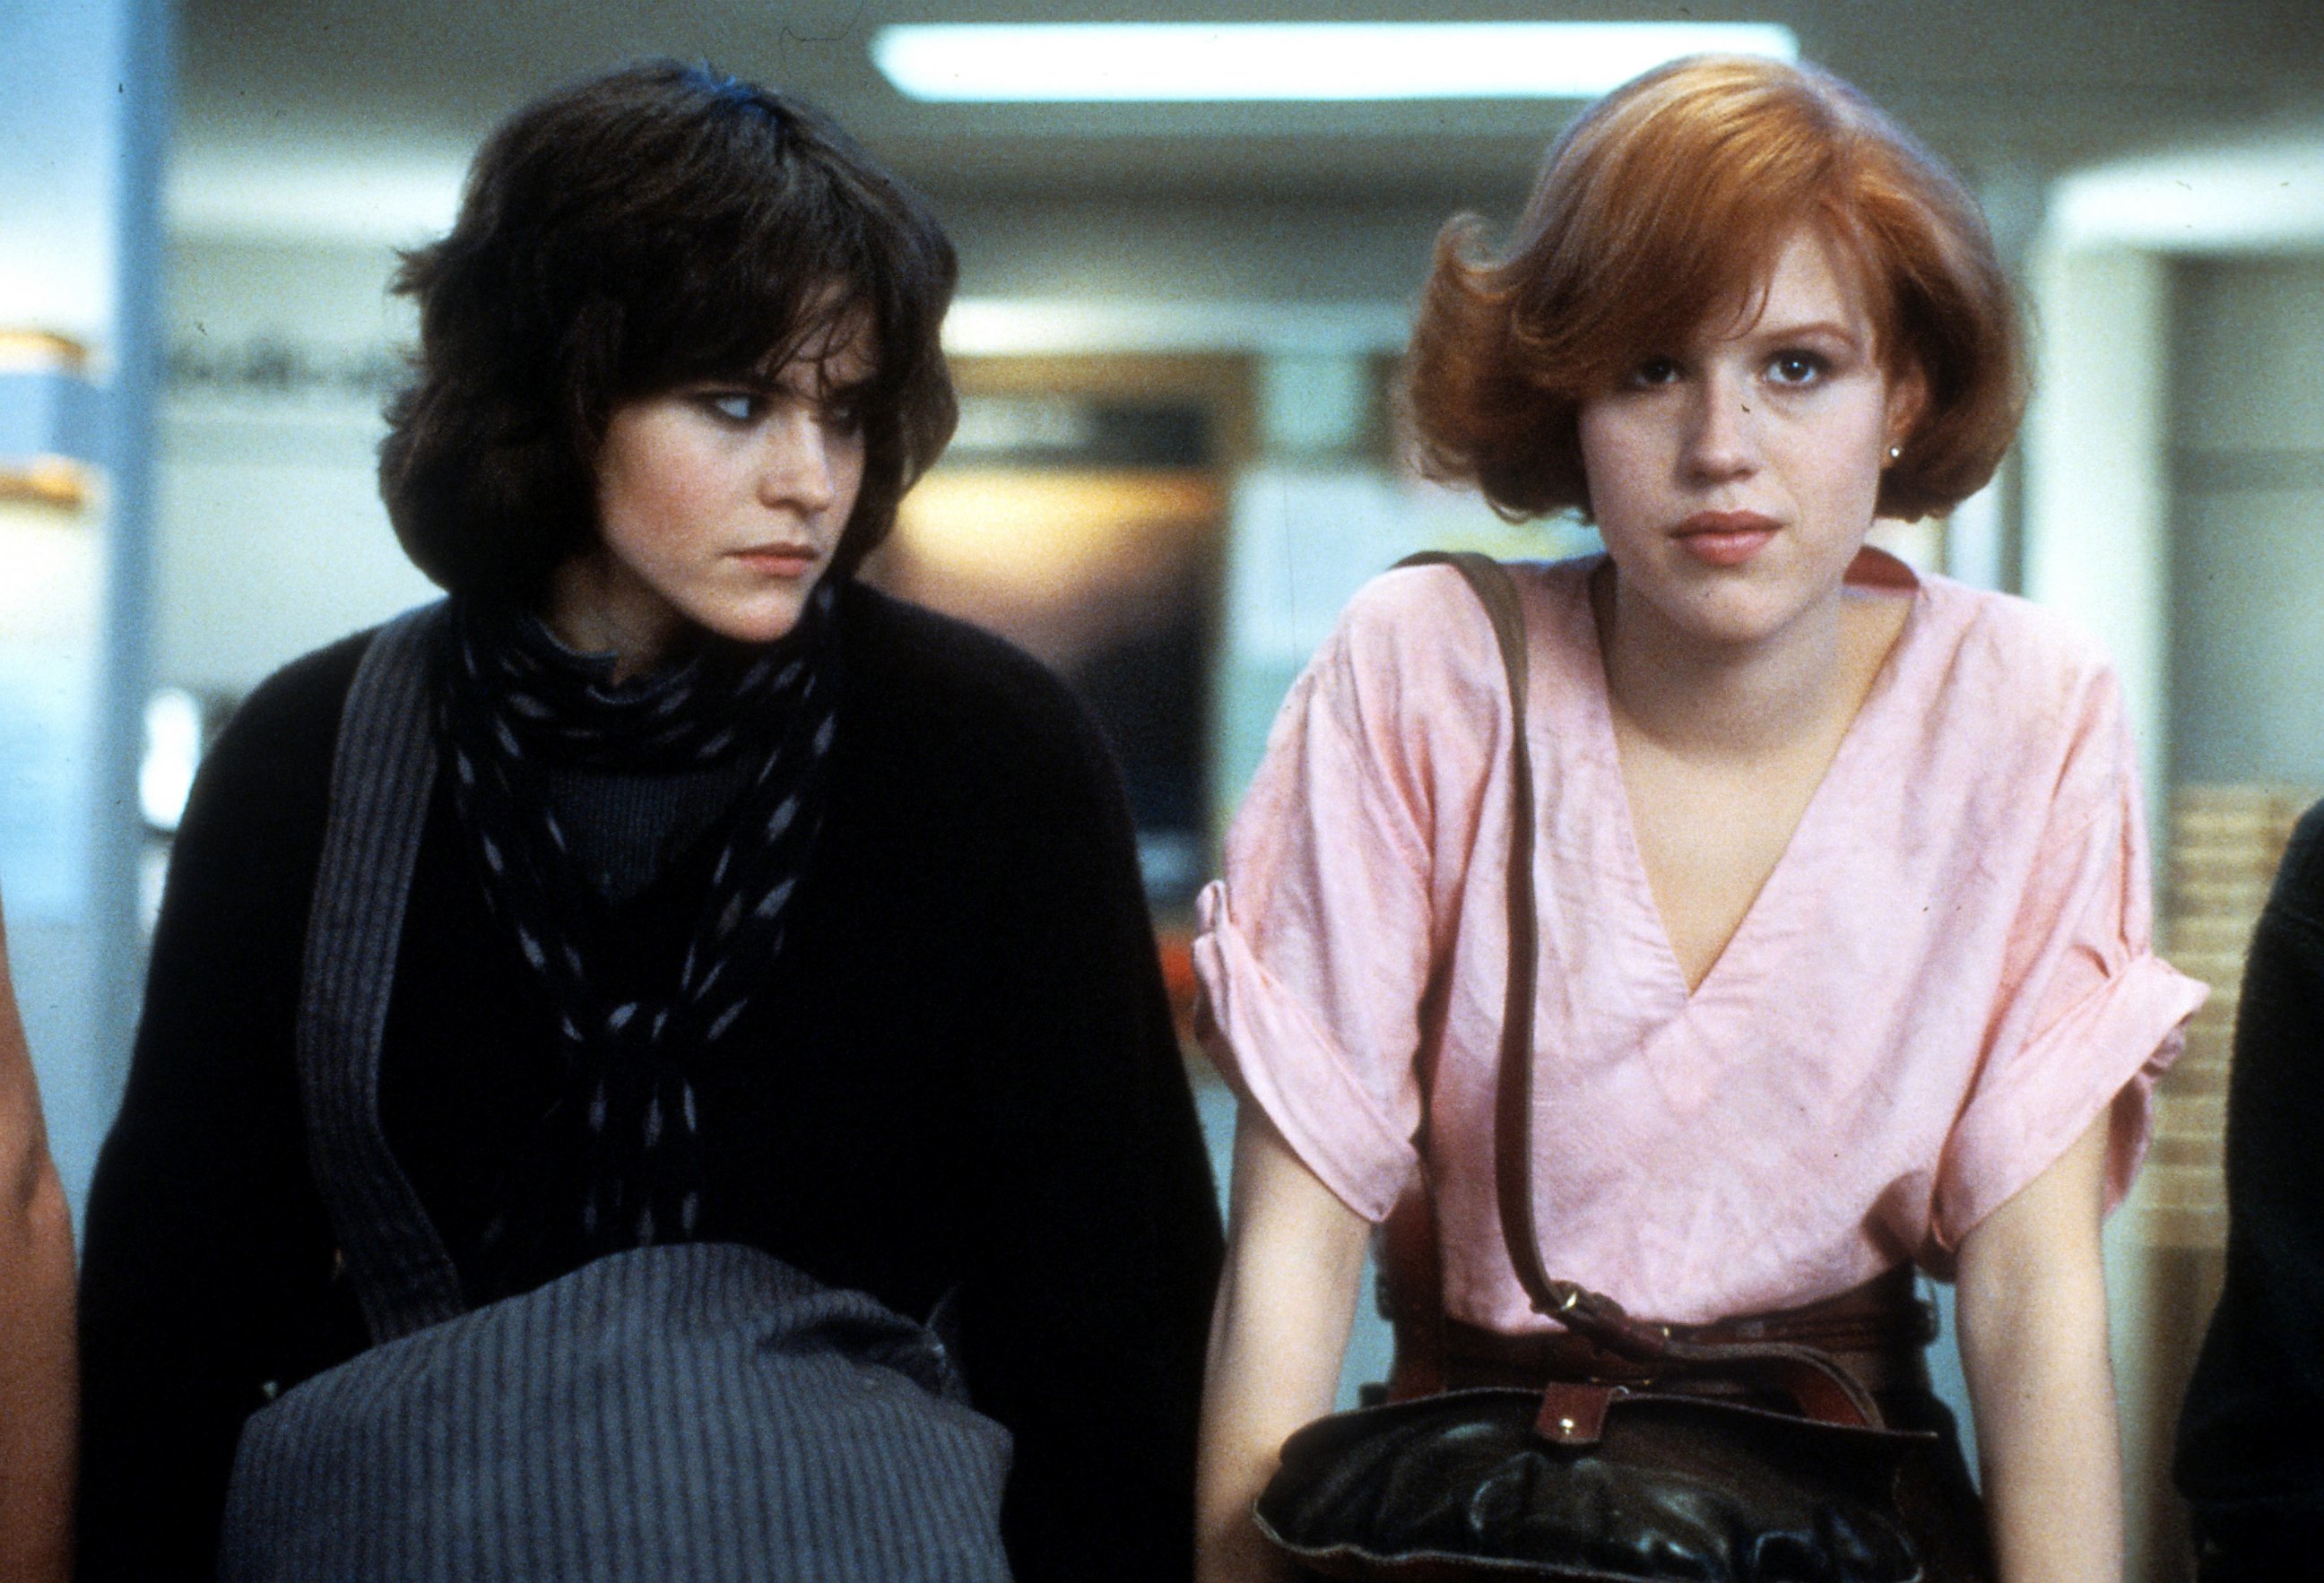 PHOTO: Ally Sheedy and Molly Ringwald in a scene from the film "The Breakfast Club", 1985.